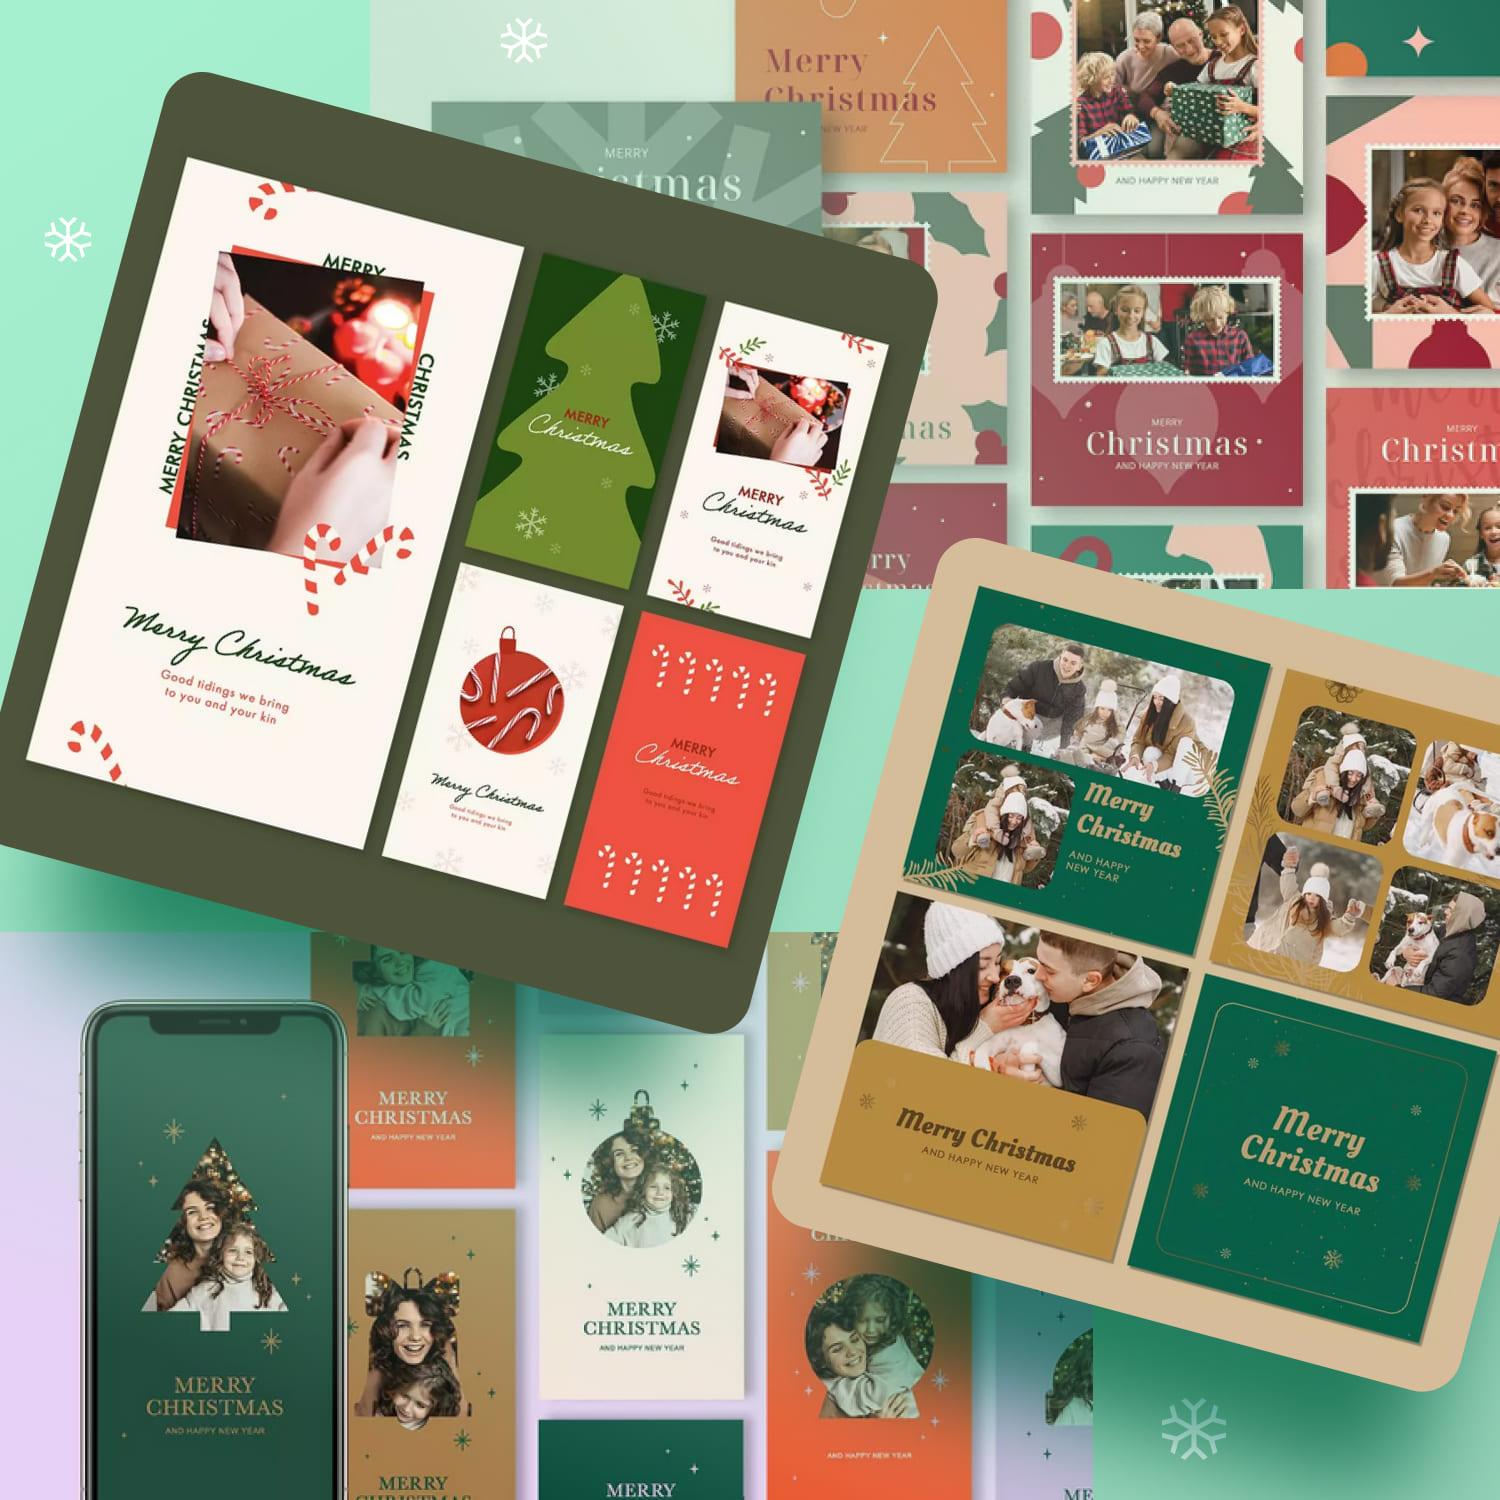 50 Christmas Instagram Post & Story Templates cover.